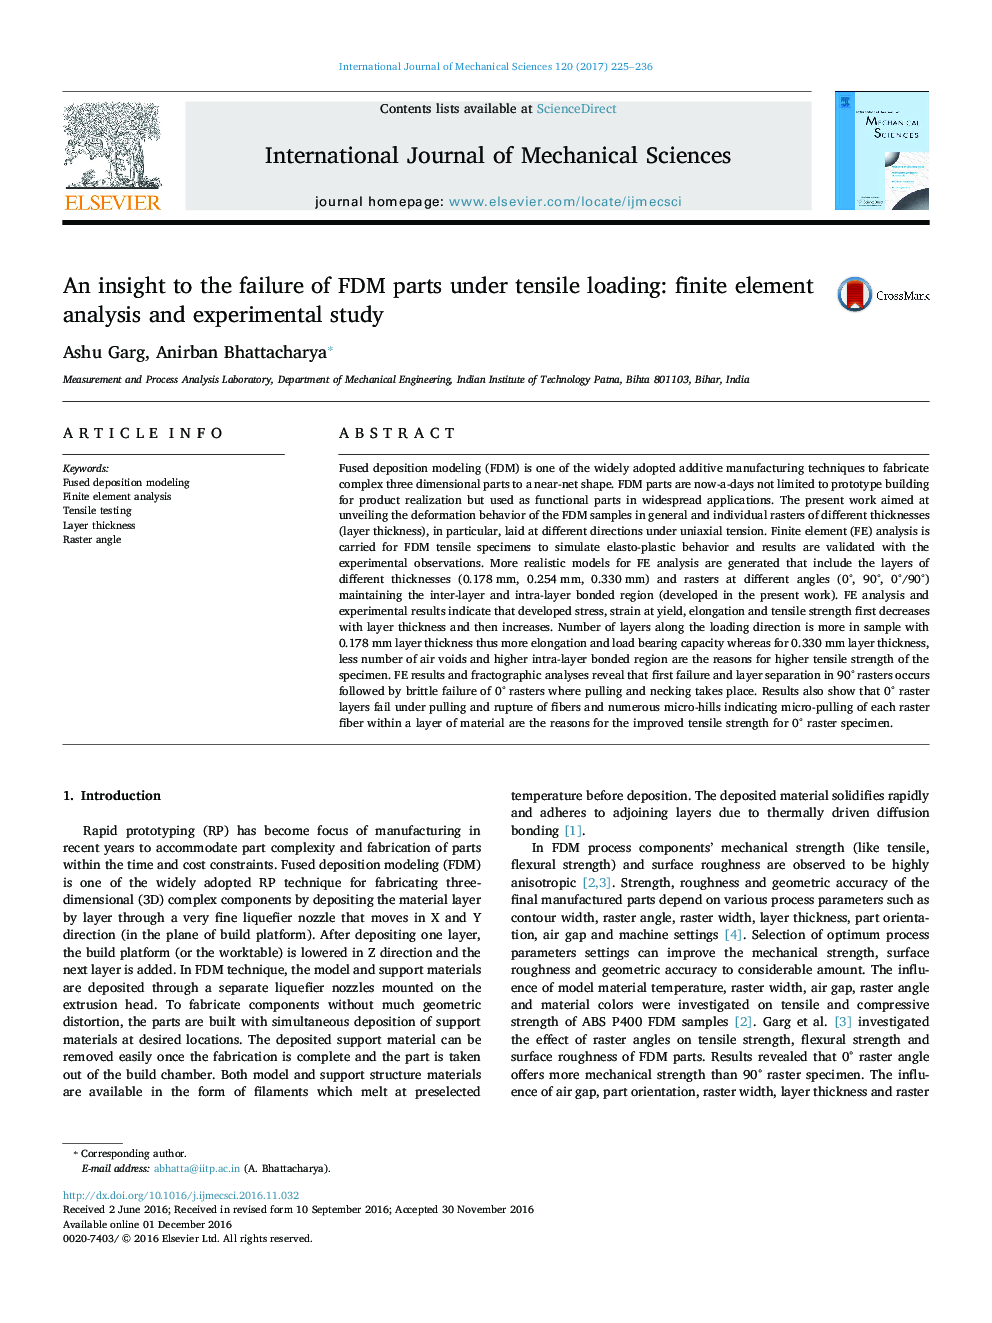 An insight to the failure of FDM parts under tensile loading: finite element analysis and experimental study